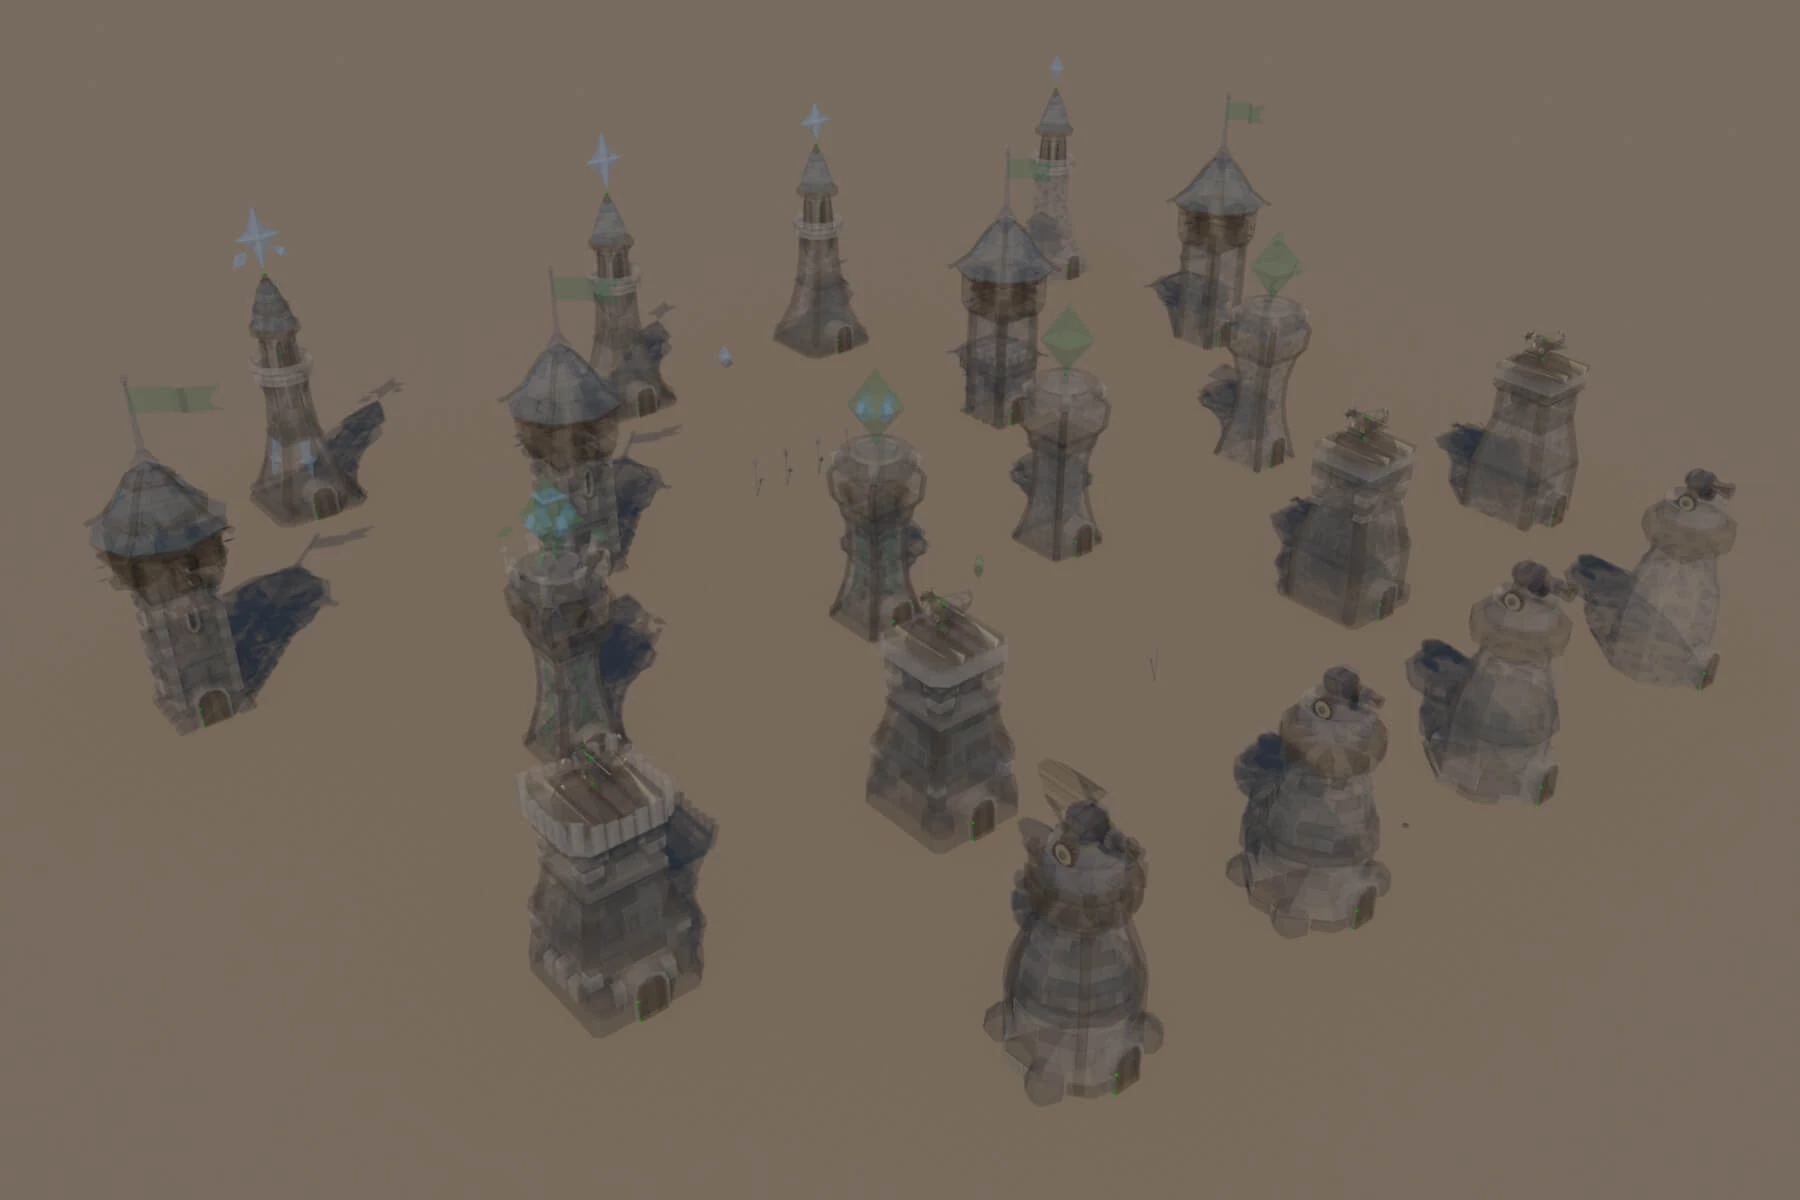 178,983 Tower Defense Tower Images, Stock Photos, 3D objects, & Vectors